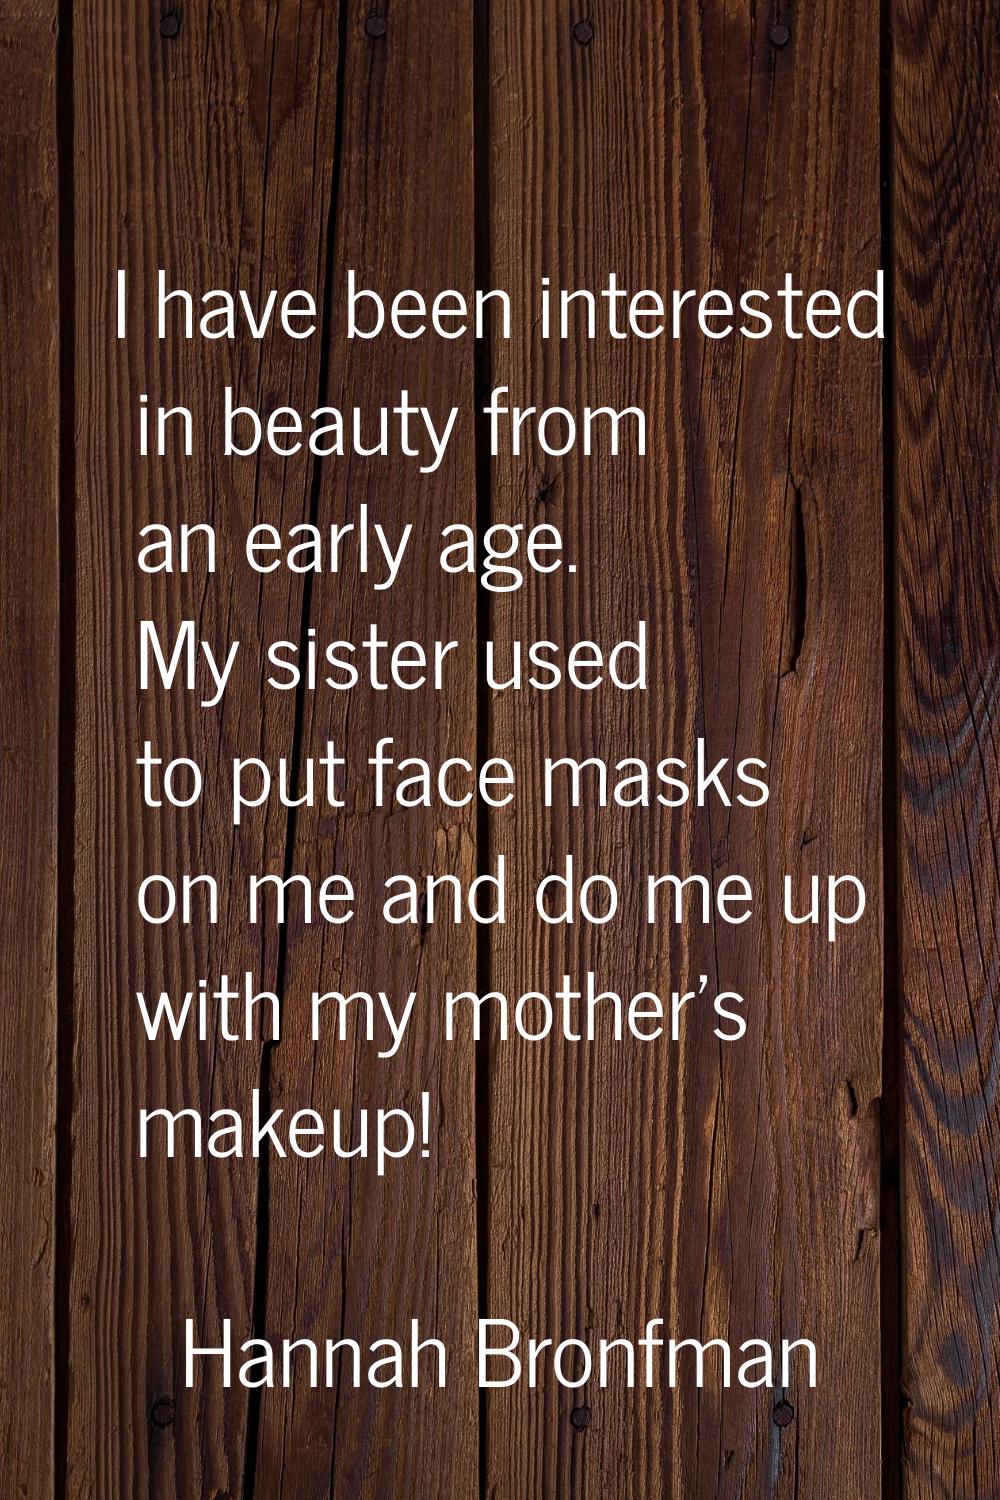 I have been interested in beauty from an early age. My sister used to put face masks on me and do m